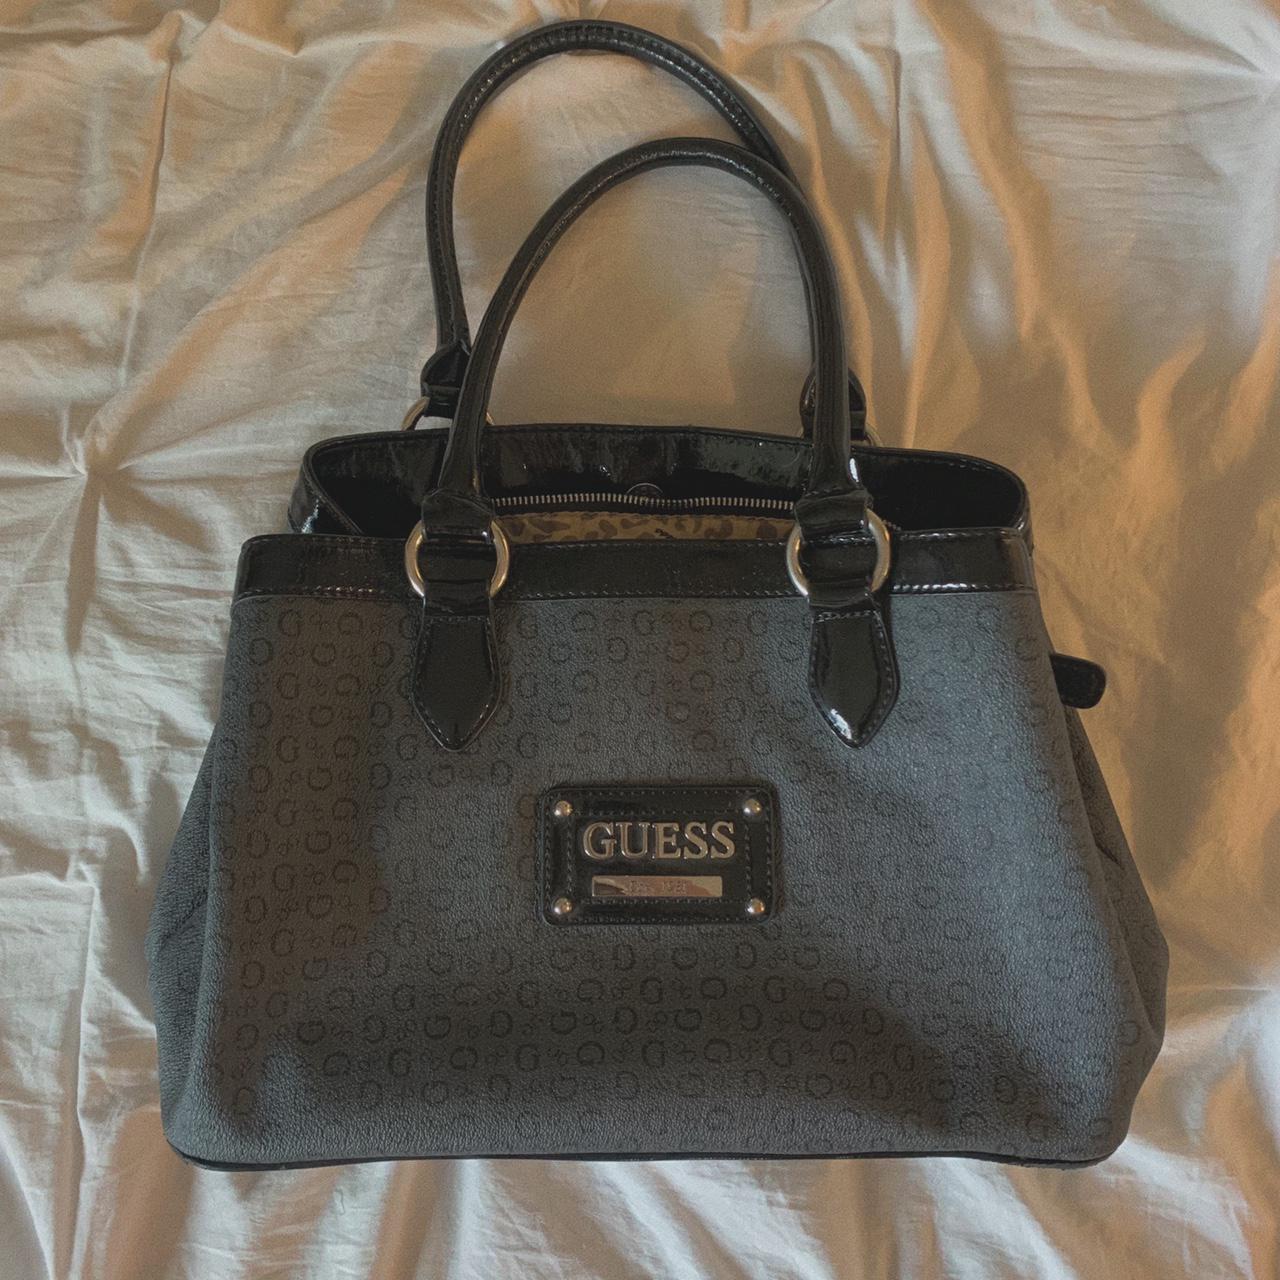 Guess Women's Black and Silver